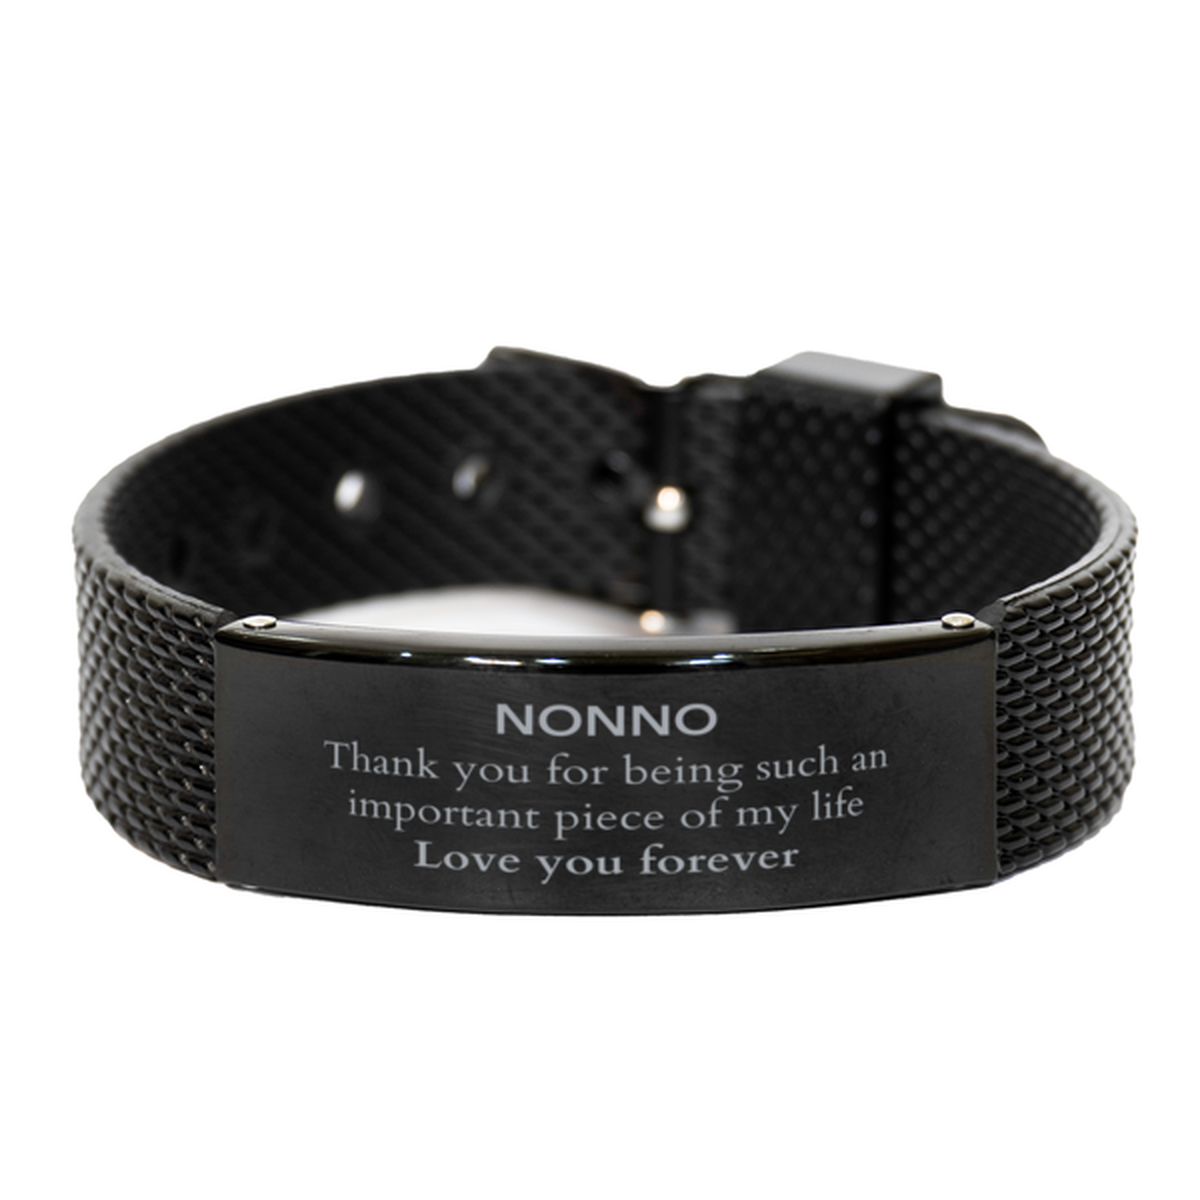 Appropriate Nonno Black Shark Mesh Bracelet Epic Birthday Gifts for Nonno Thank you for being such an important piece of my life Nonno Christmas Mothers Fathers Day